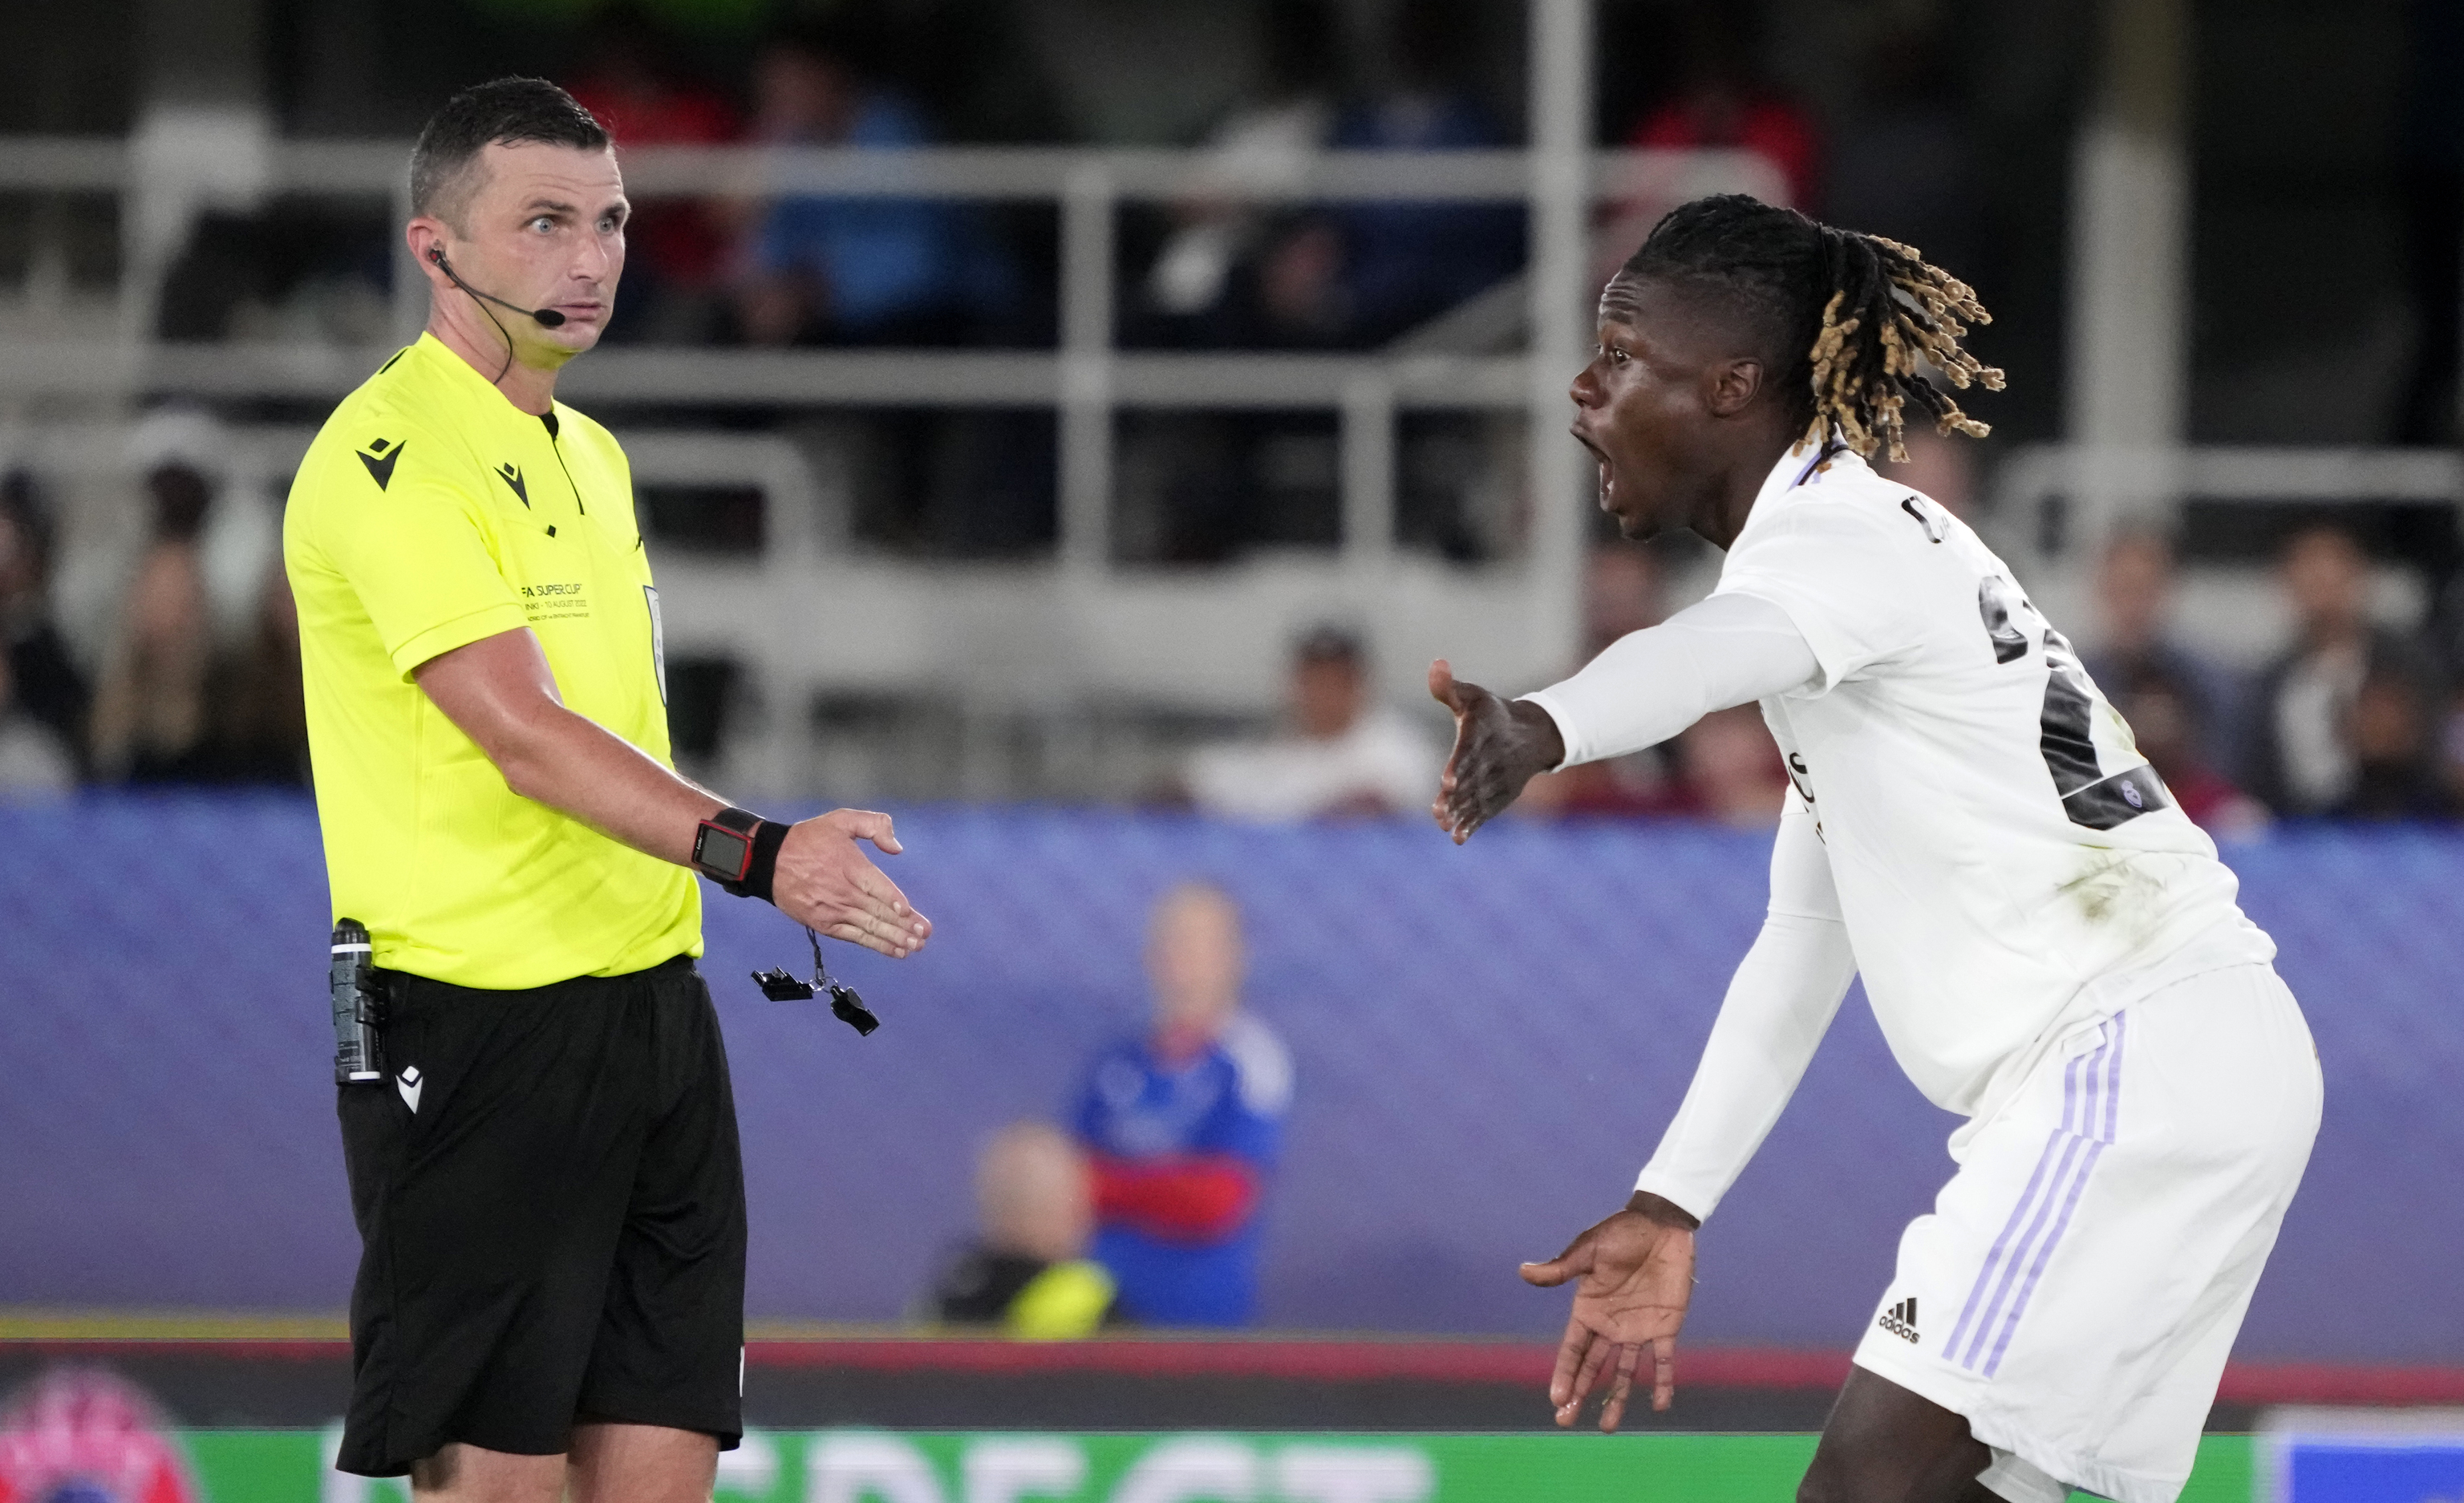 Real Madrid's Eduardo  lt;HIT gt;Camavinga lt;/HIT gt;, right, discusses with referee Michael Oliver during the UEFA Super Cup final soccer match between Real Madrid and Eintracht Frankfurt at Helsinki's Olympic Stadium, Finland, Wednesday, Aug. 10, 2022. (AP Photo/Sergei Grits)